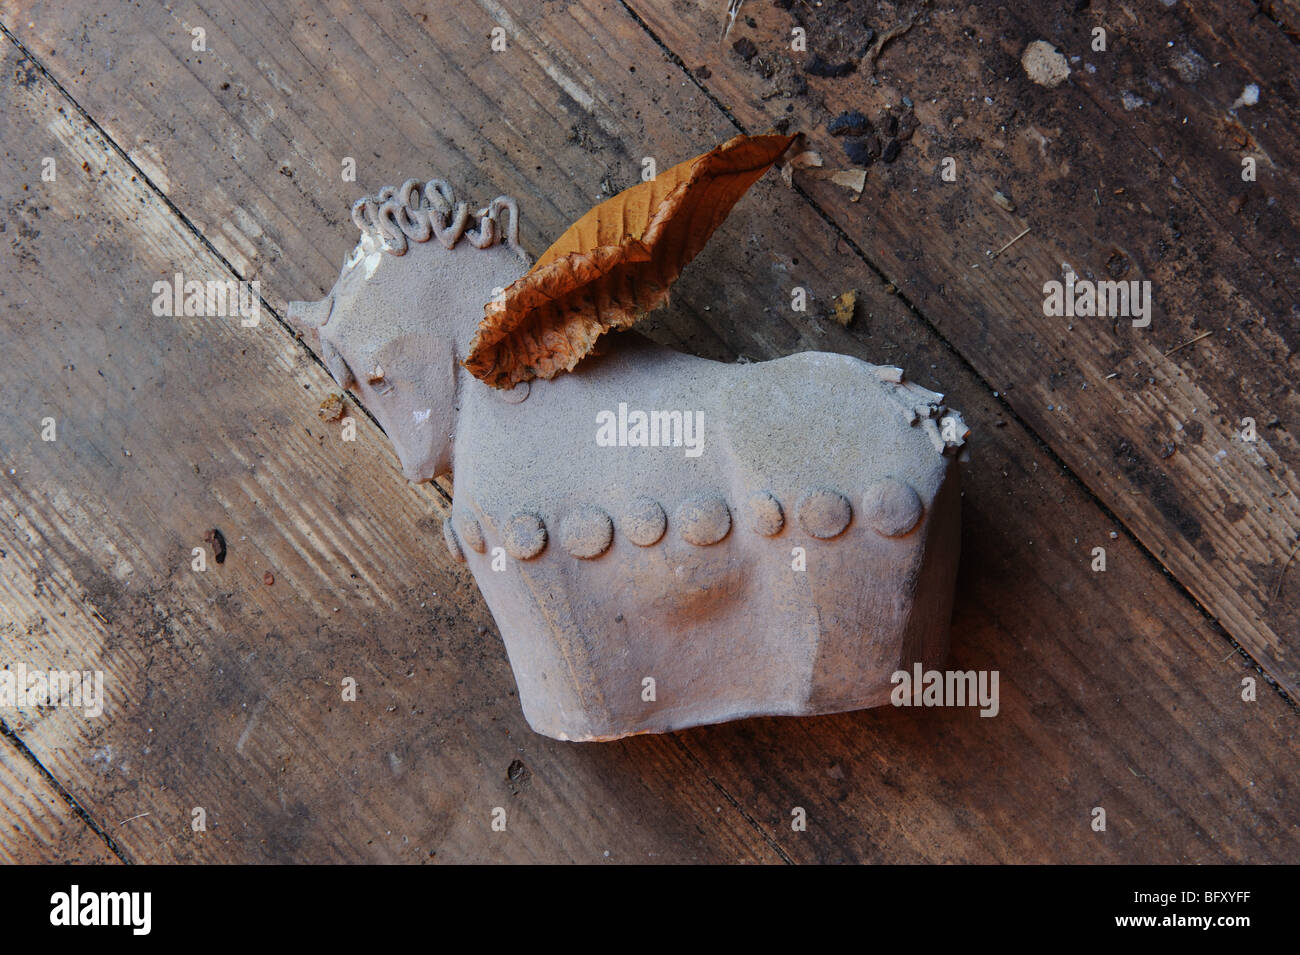 Unfinished, unglazed and broken ceramic horse ornament lies on dirty wooden floor. A golden leaf has fallen on it Stock Photo